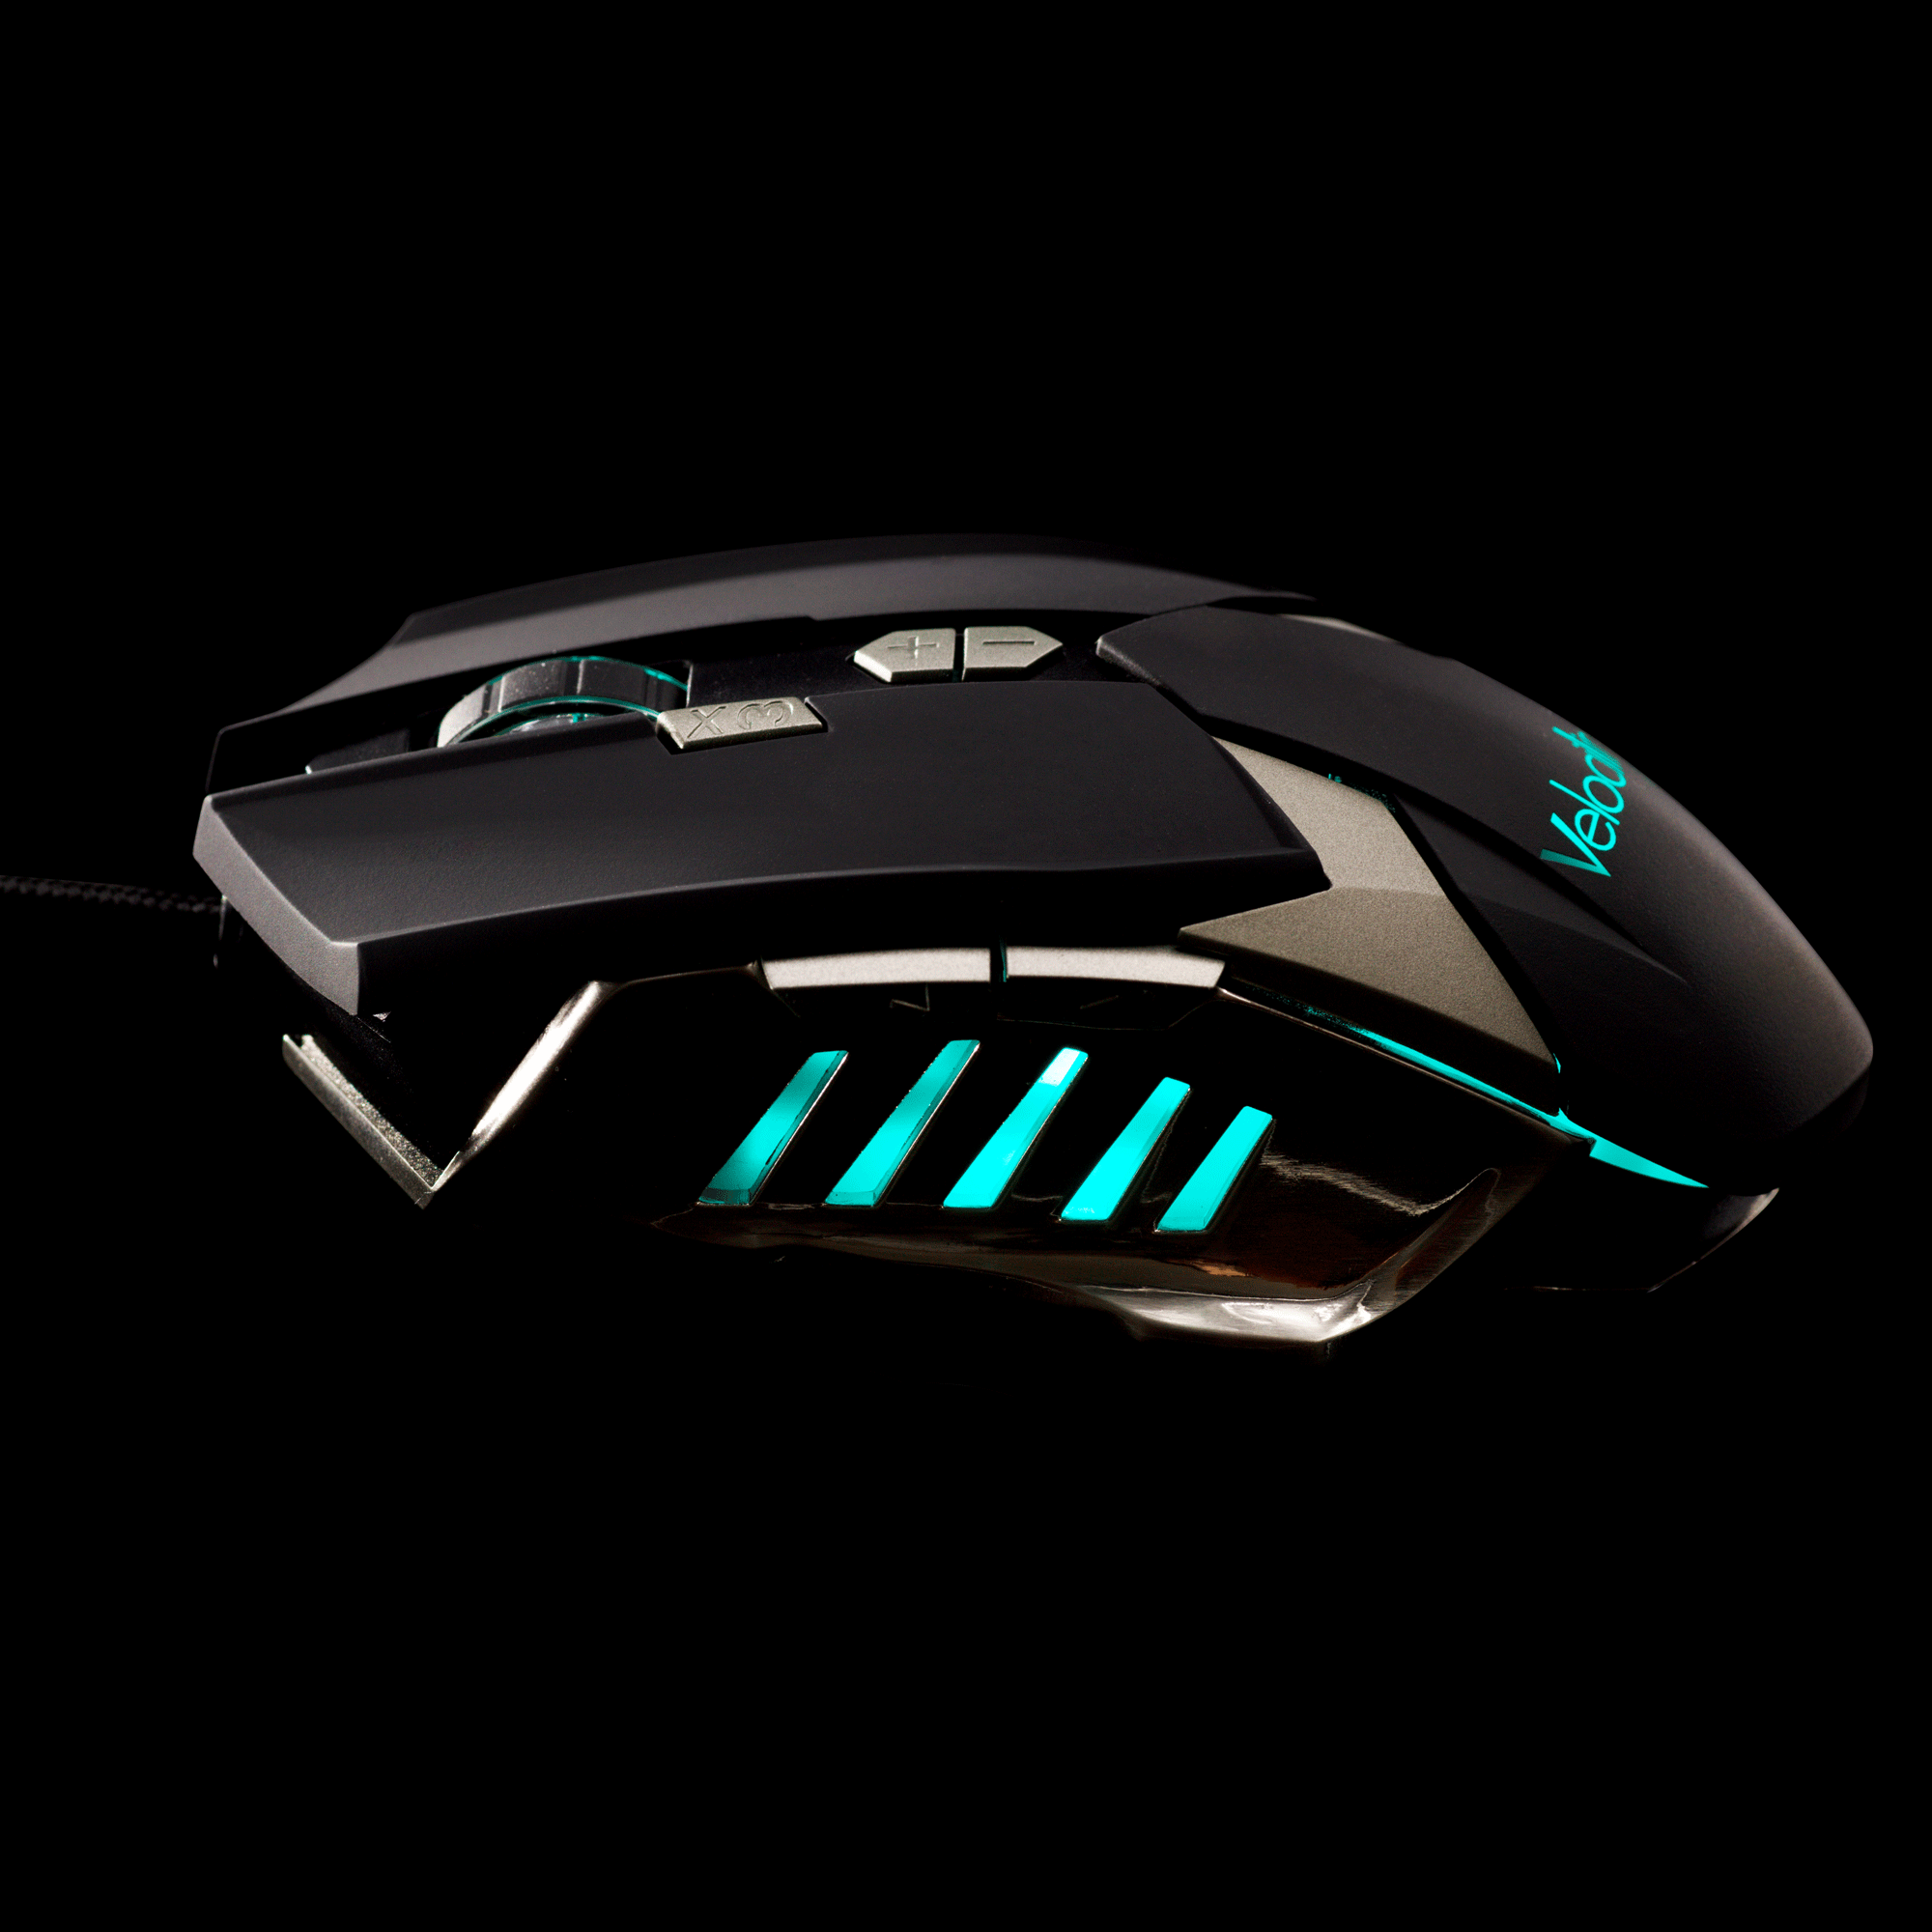 Tyr mouse